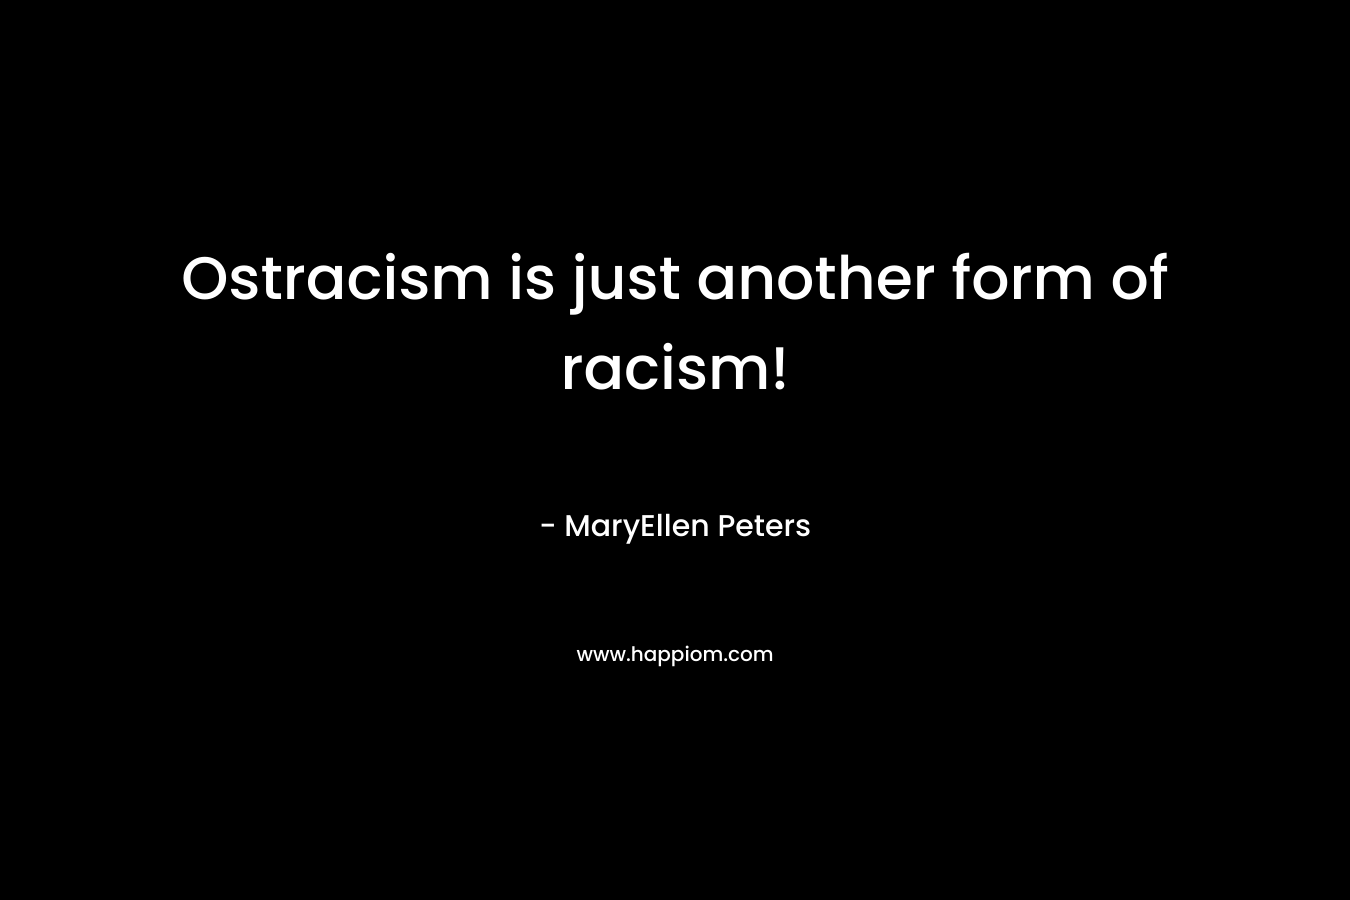 Ostracism is just another form of racism! – MaryEllen Peters